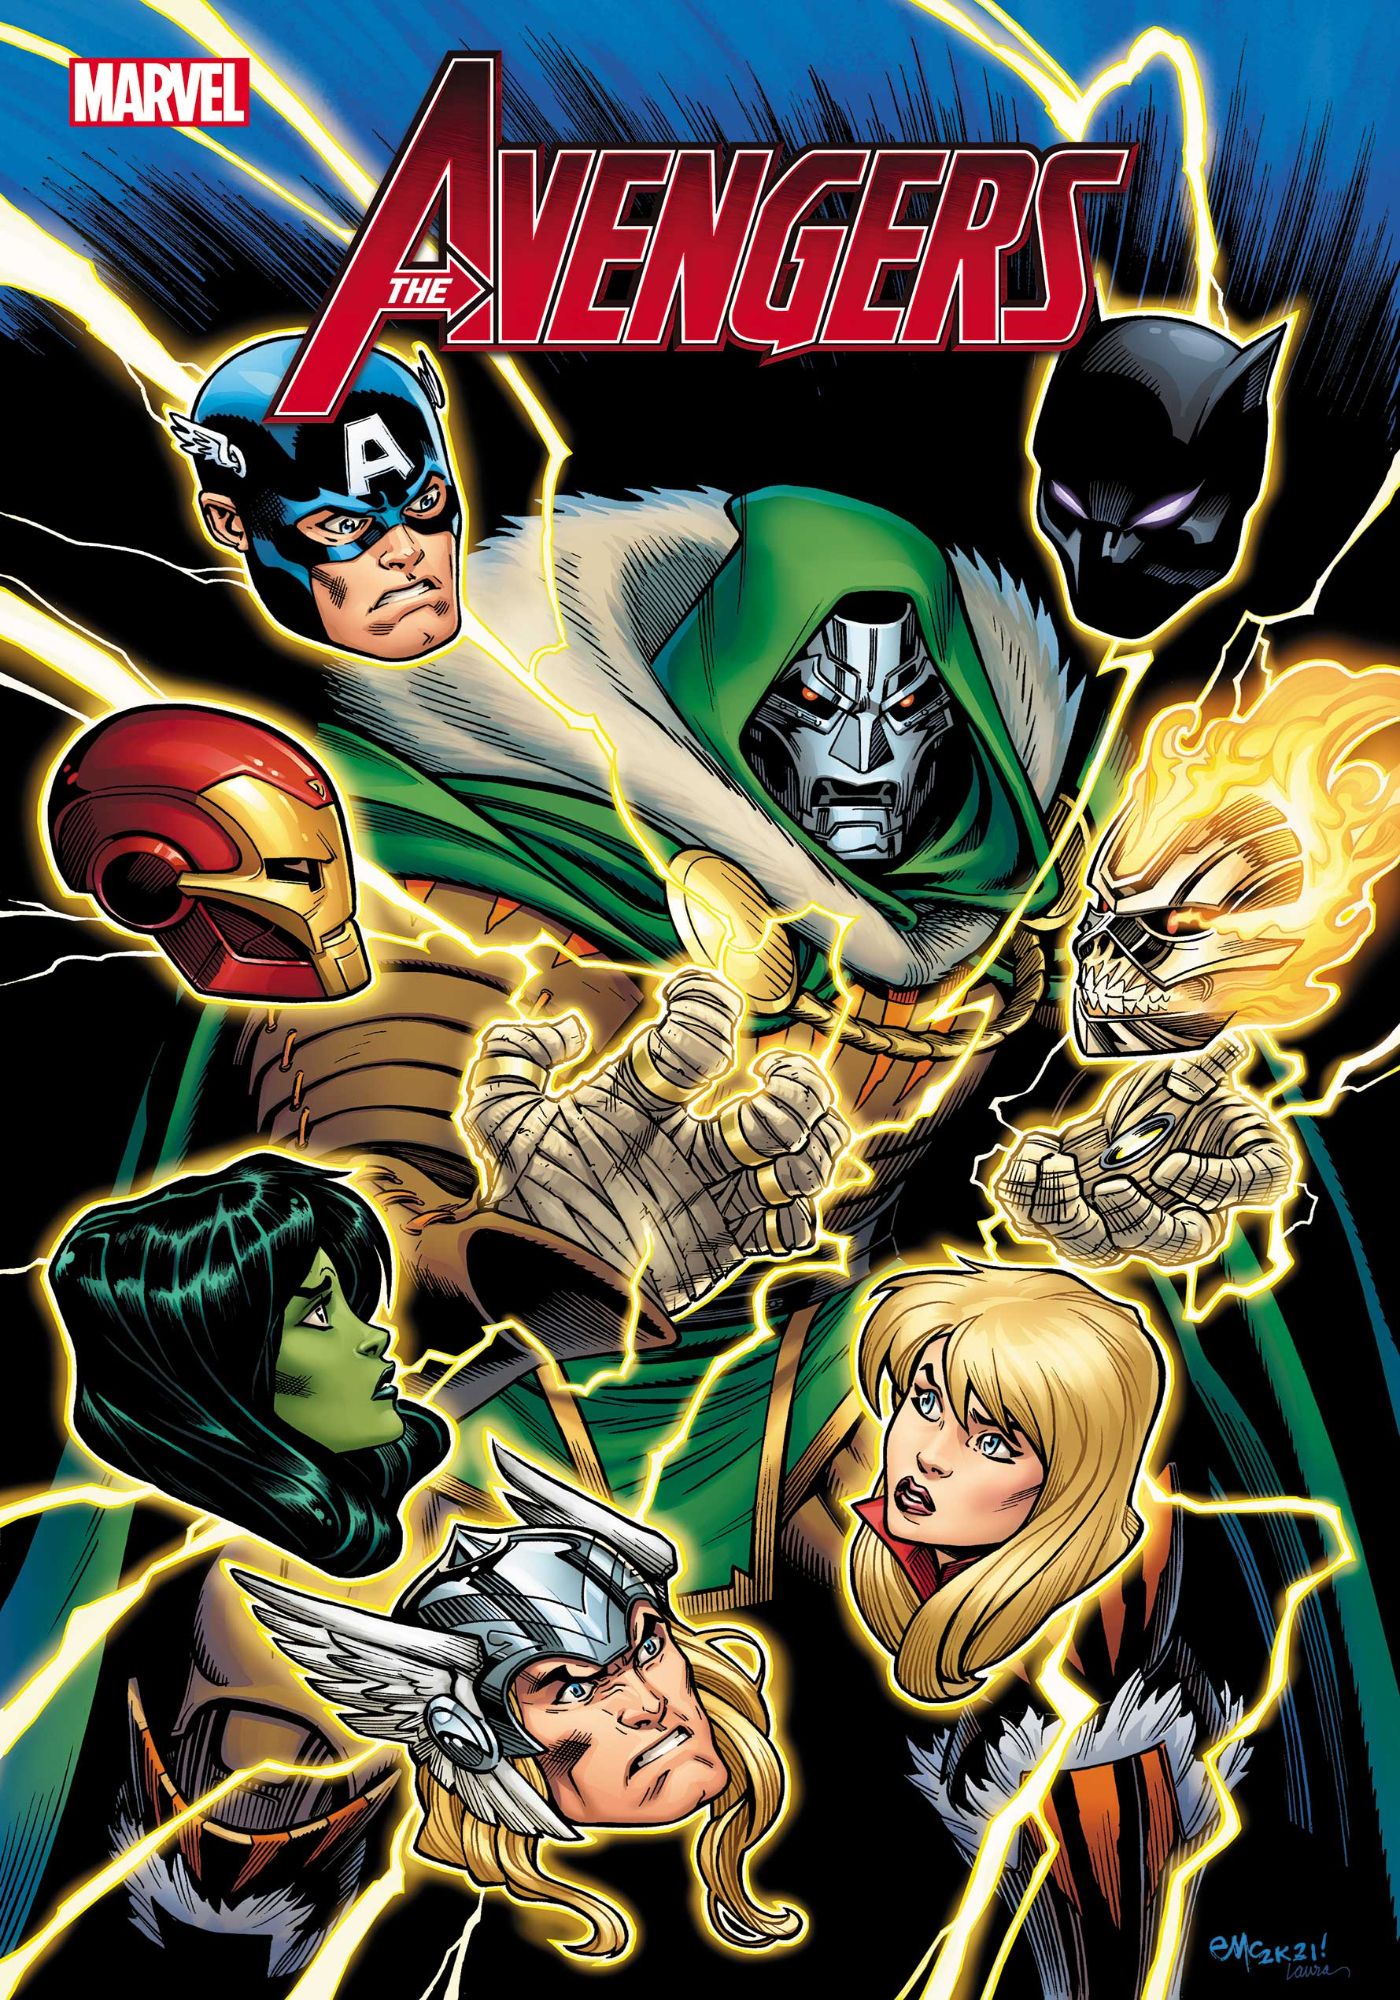 Marvels Avengers Are About To Battle The Multiversal Masters of Evil